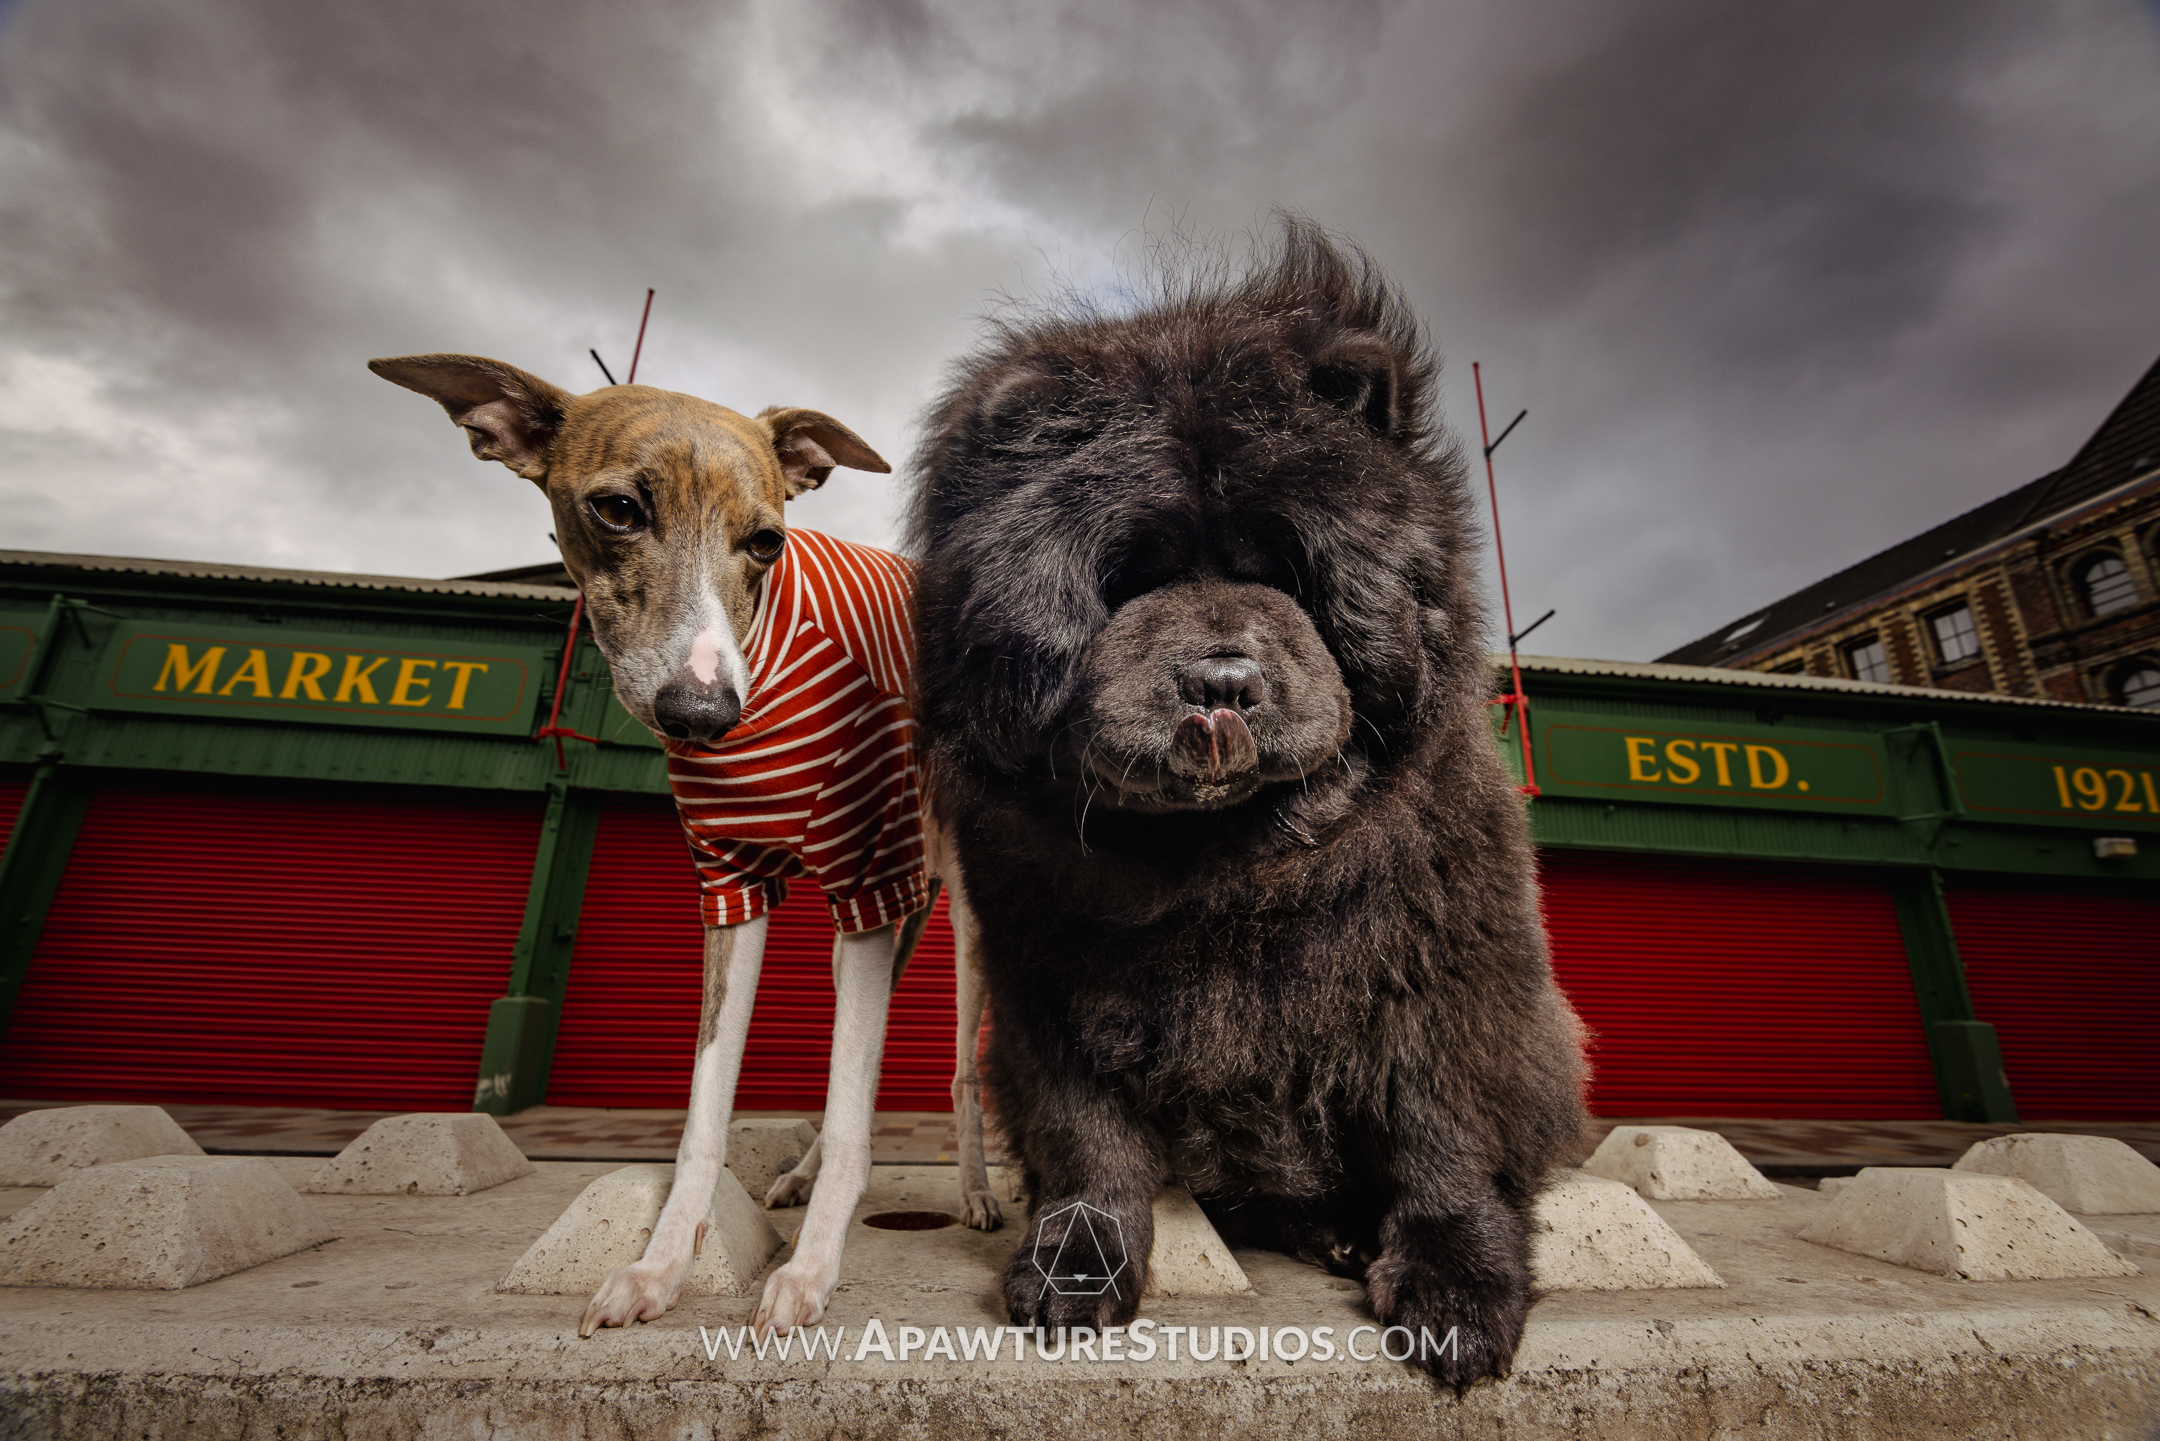 Whippet and Chow Chow pose in stormy background professional pet photograph in Glasgow, Scotland 